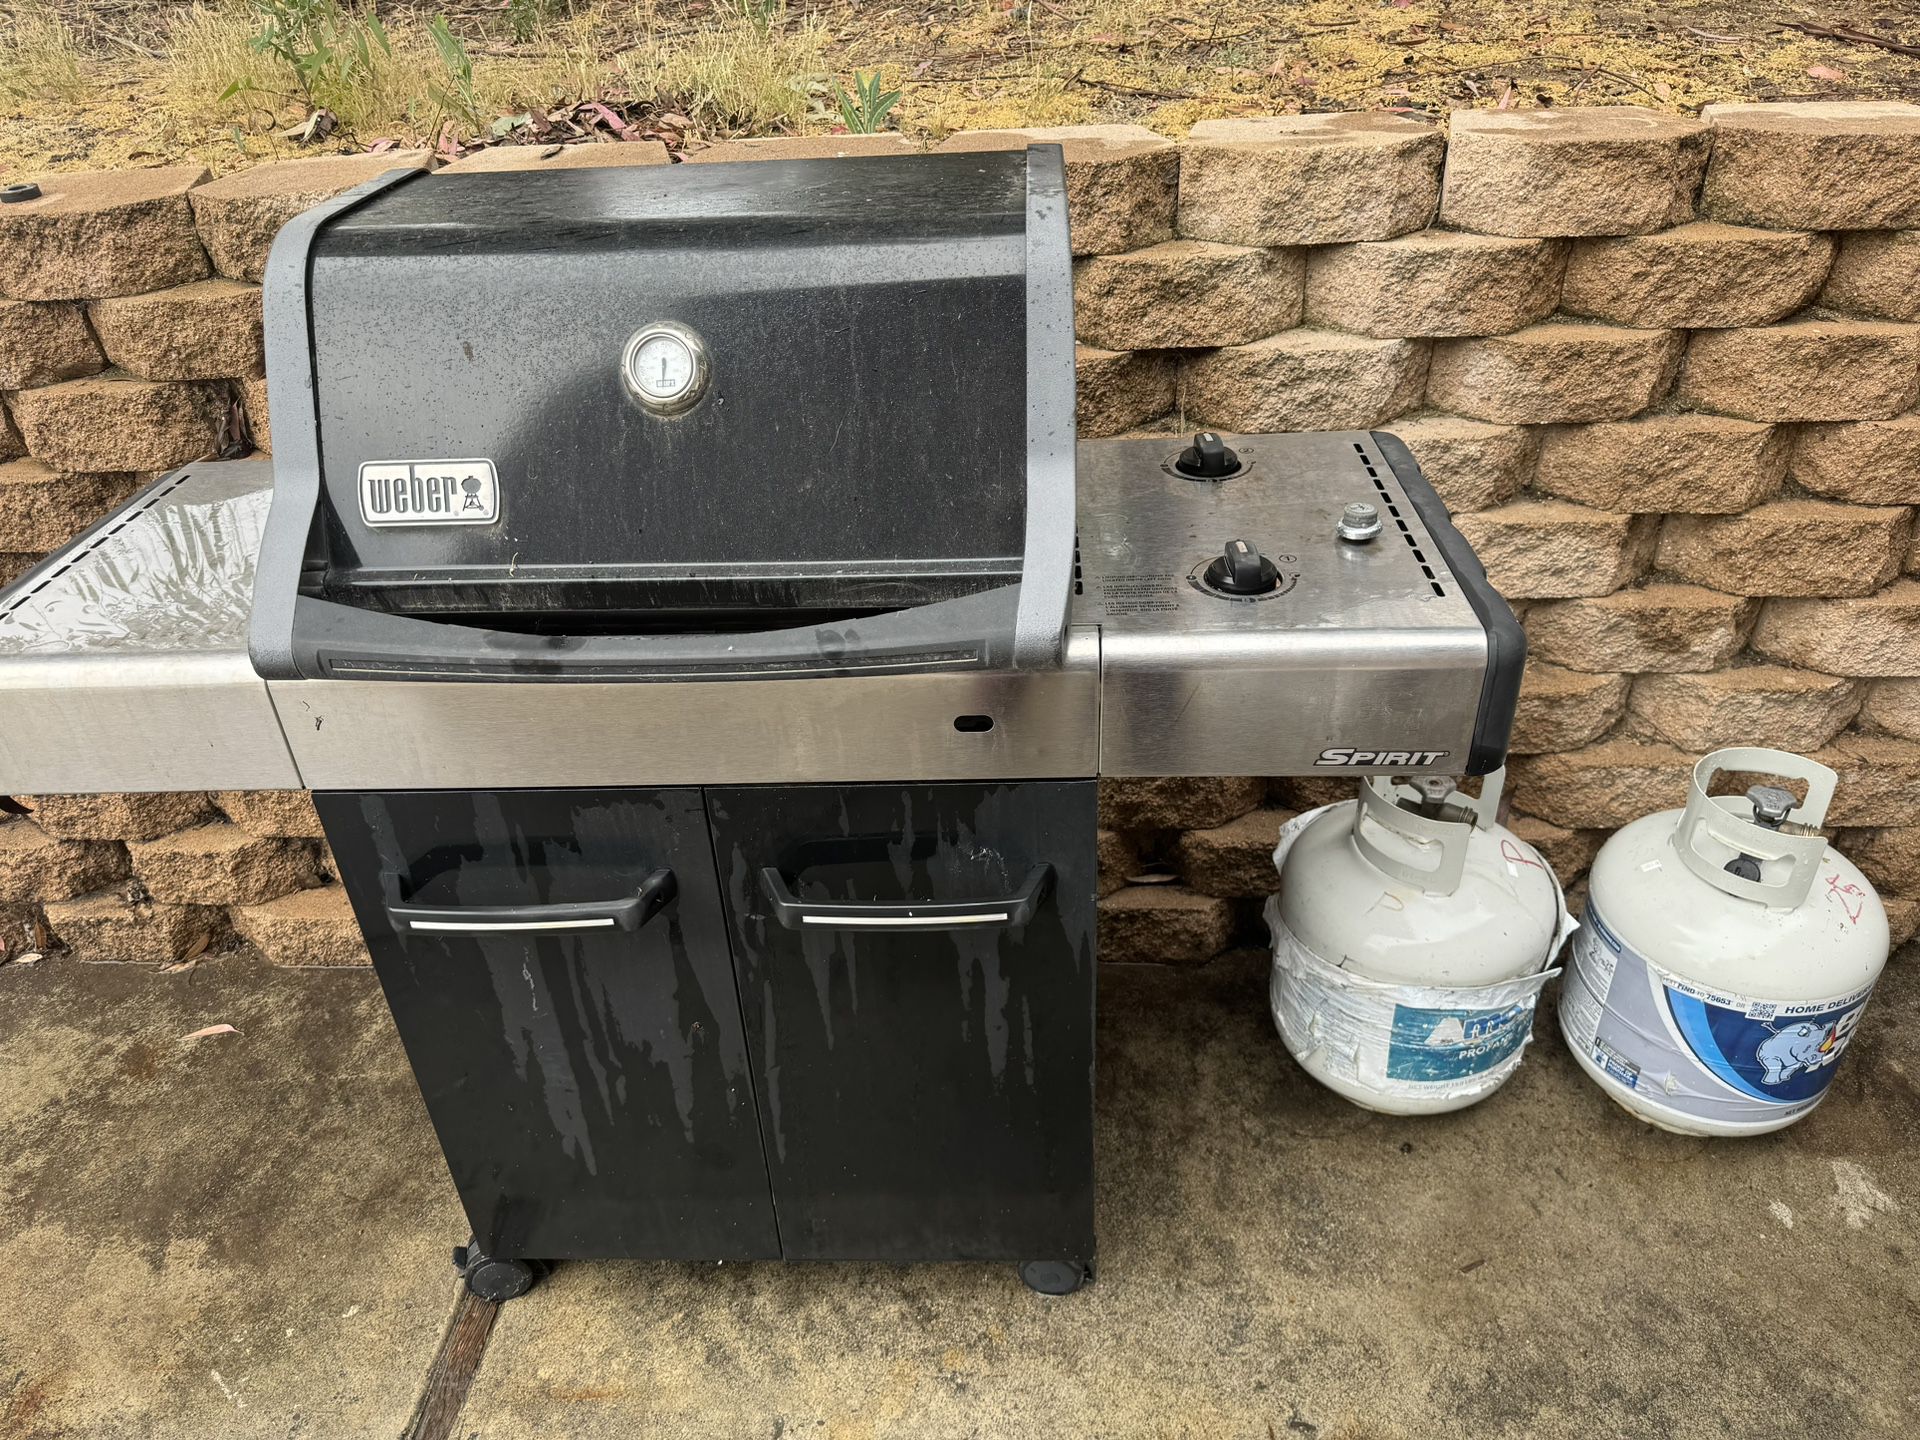 Weber Grill And 2 Propane Tanks 